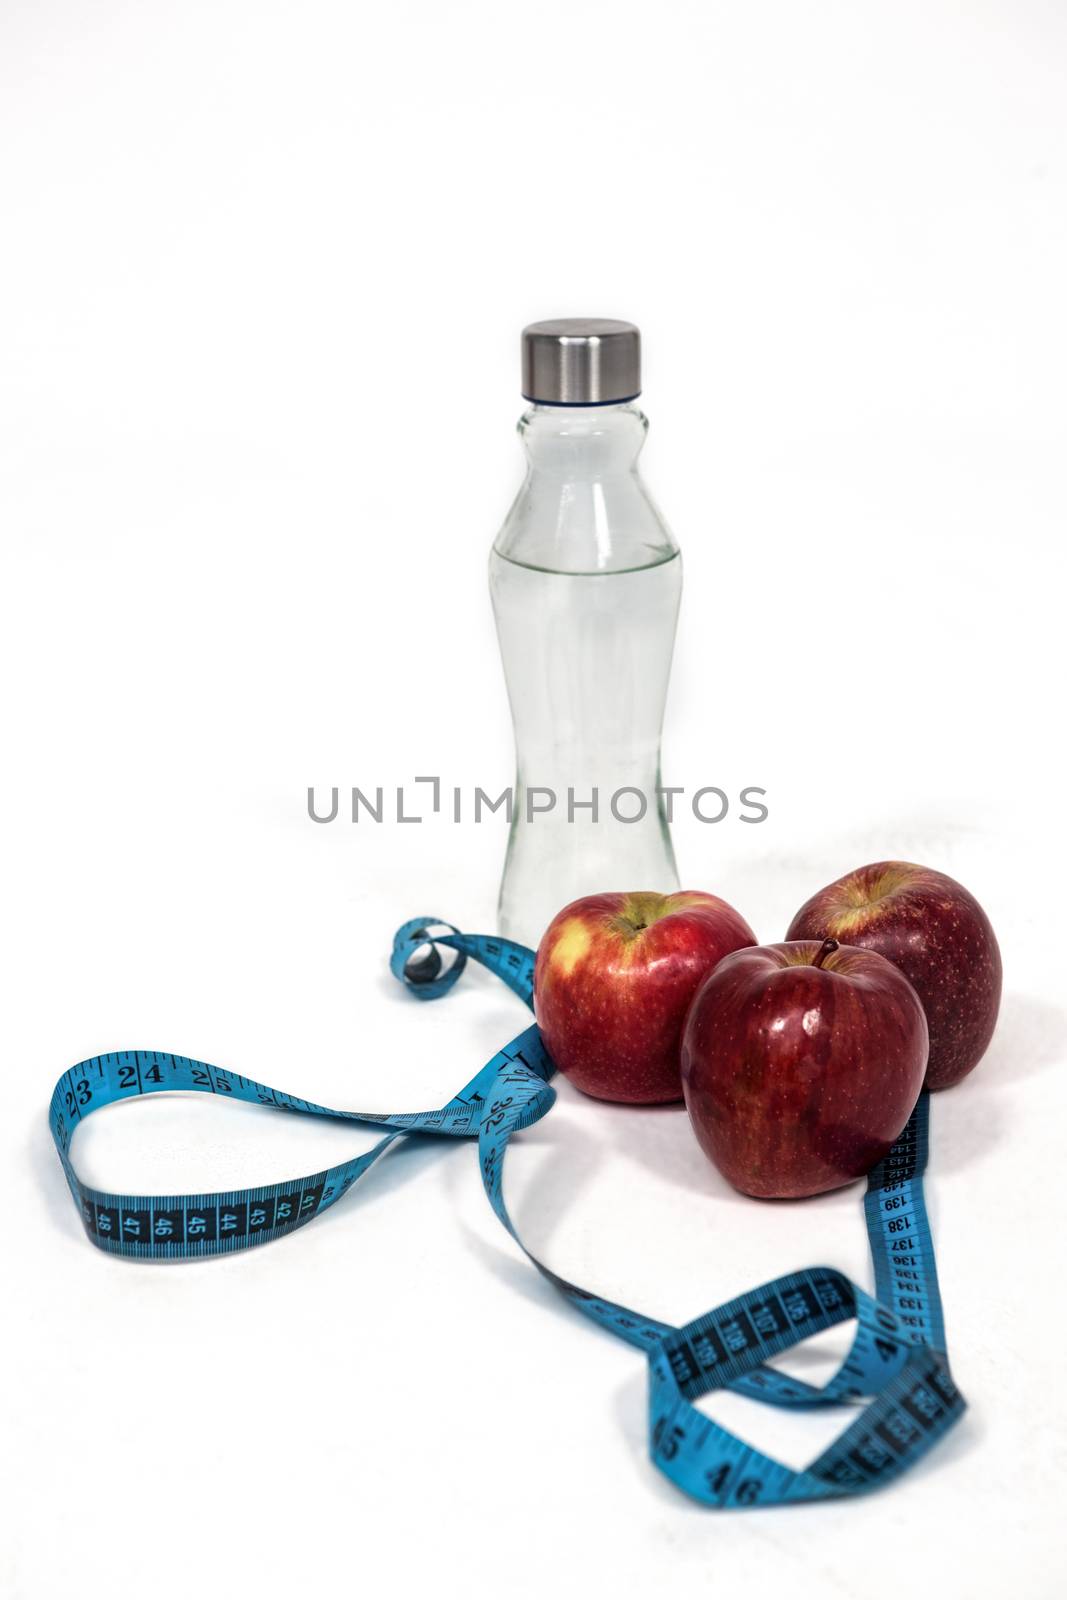 Ingredients for a healthy lifestyle on white background